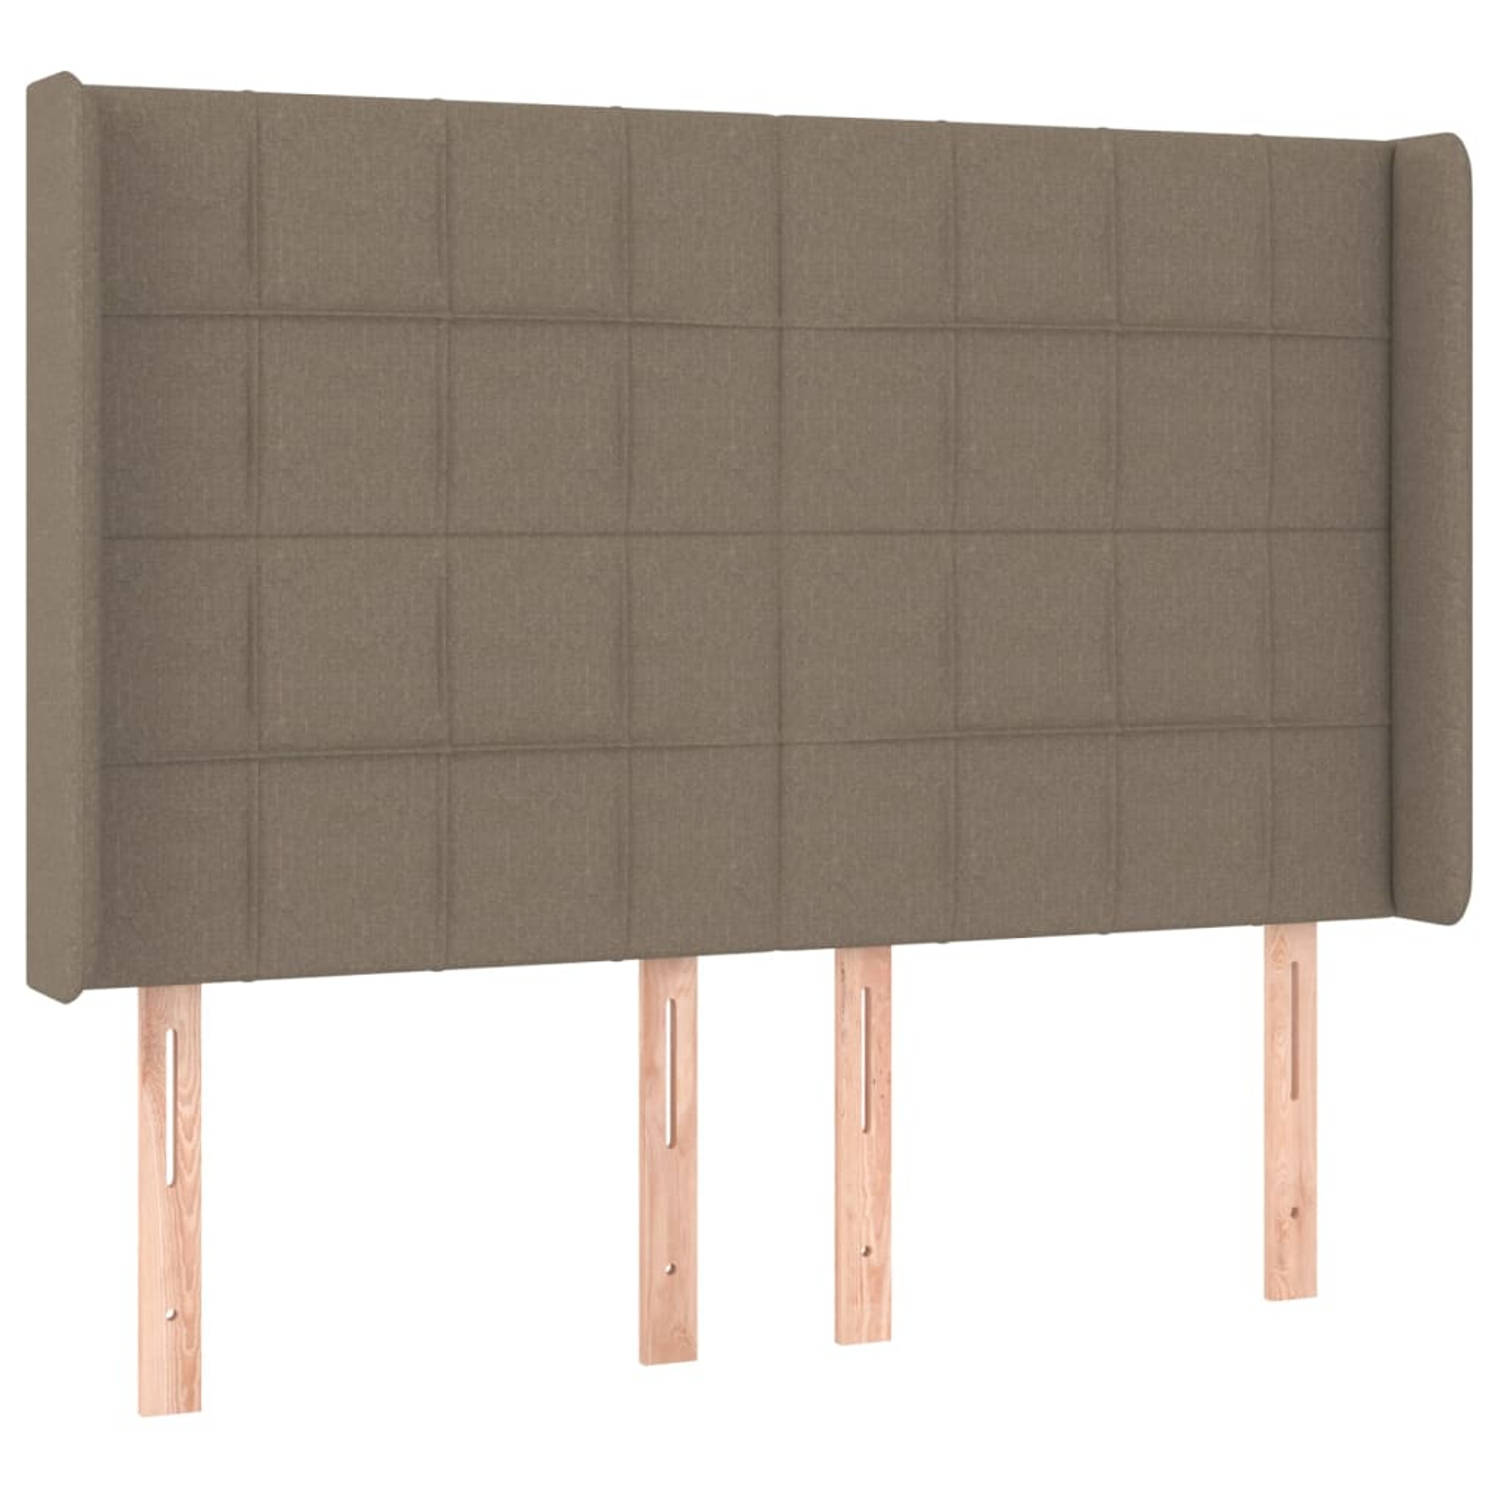 The Living Store Hoofdbord - Bedombouw - 147x16x118/128 cm - Taupe